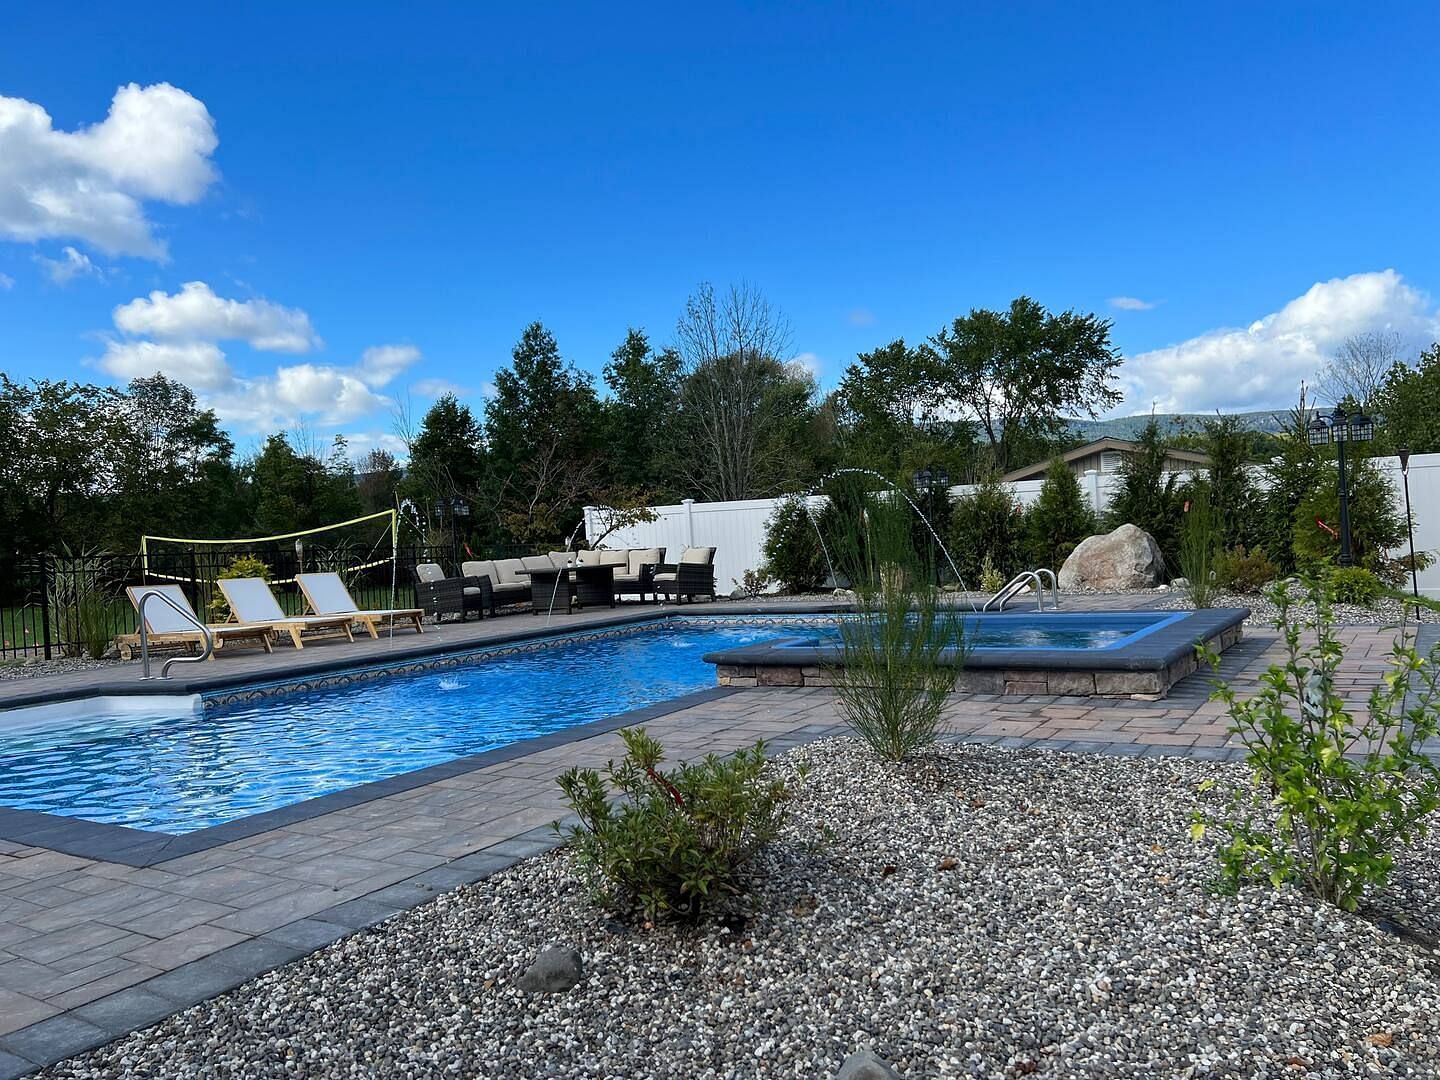 JWguest Villa at Wallkill, New York | Resort style house with pool - 5min from bethel | Jwbnb no brobnb 38